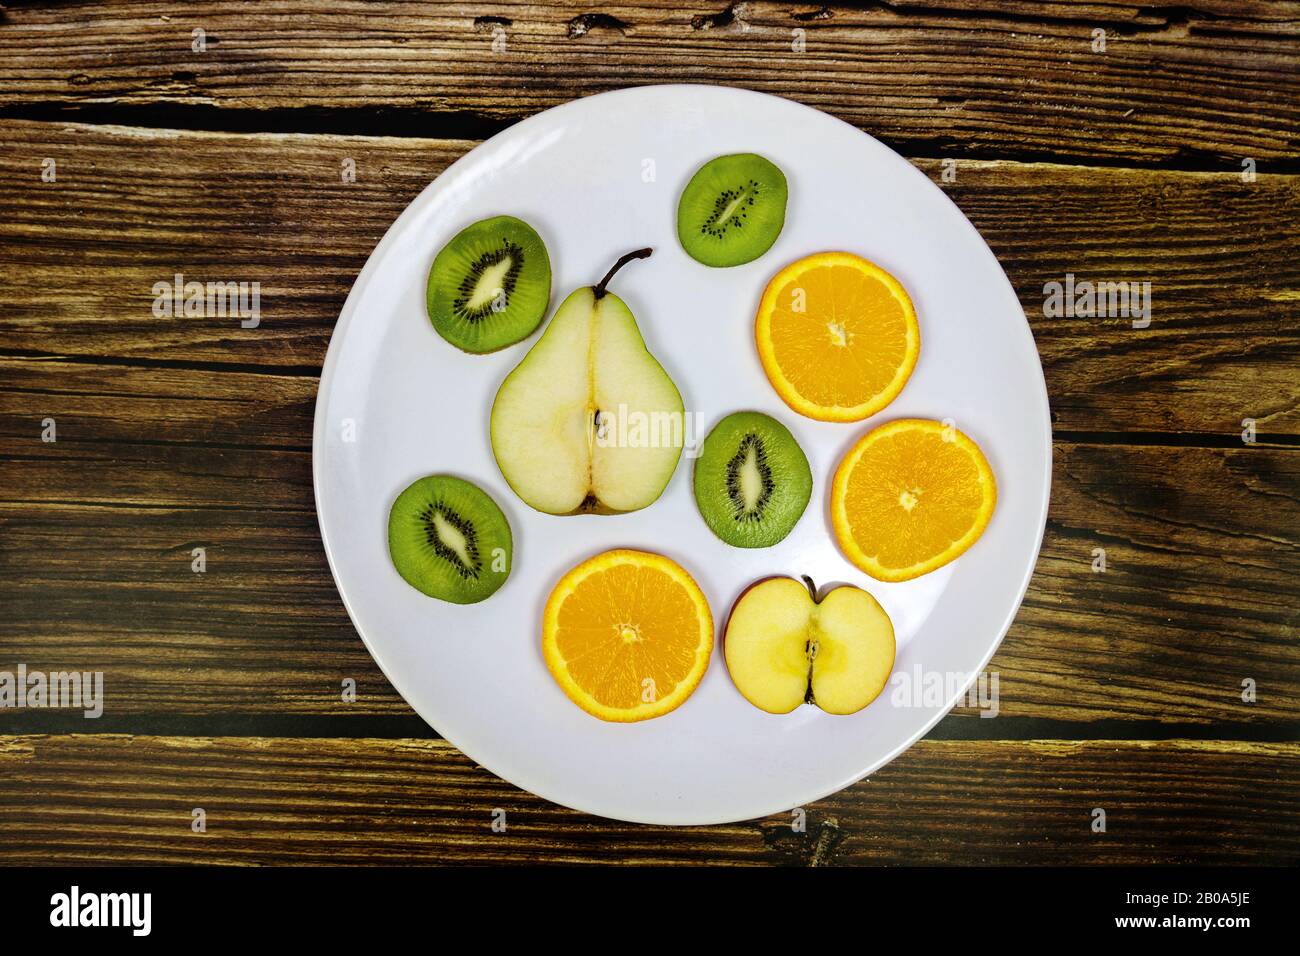 sliced fruits pear kiwi orange apple on a white plate witg rustic wooden background Stock Photo